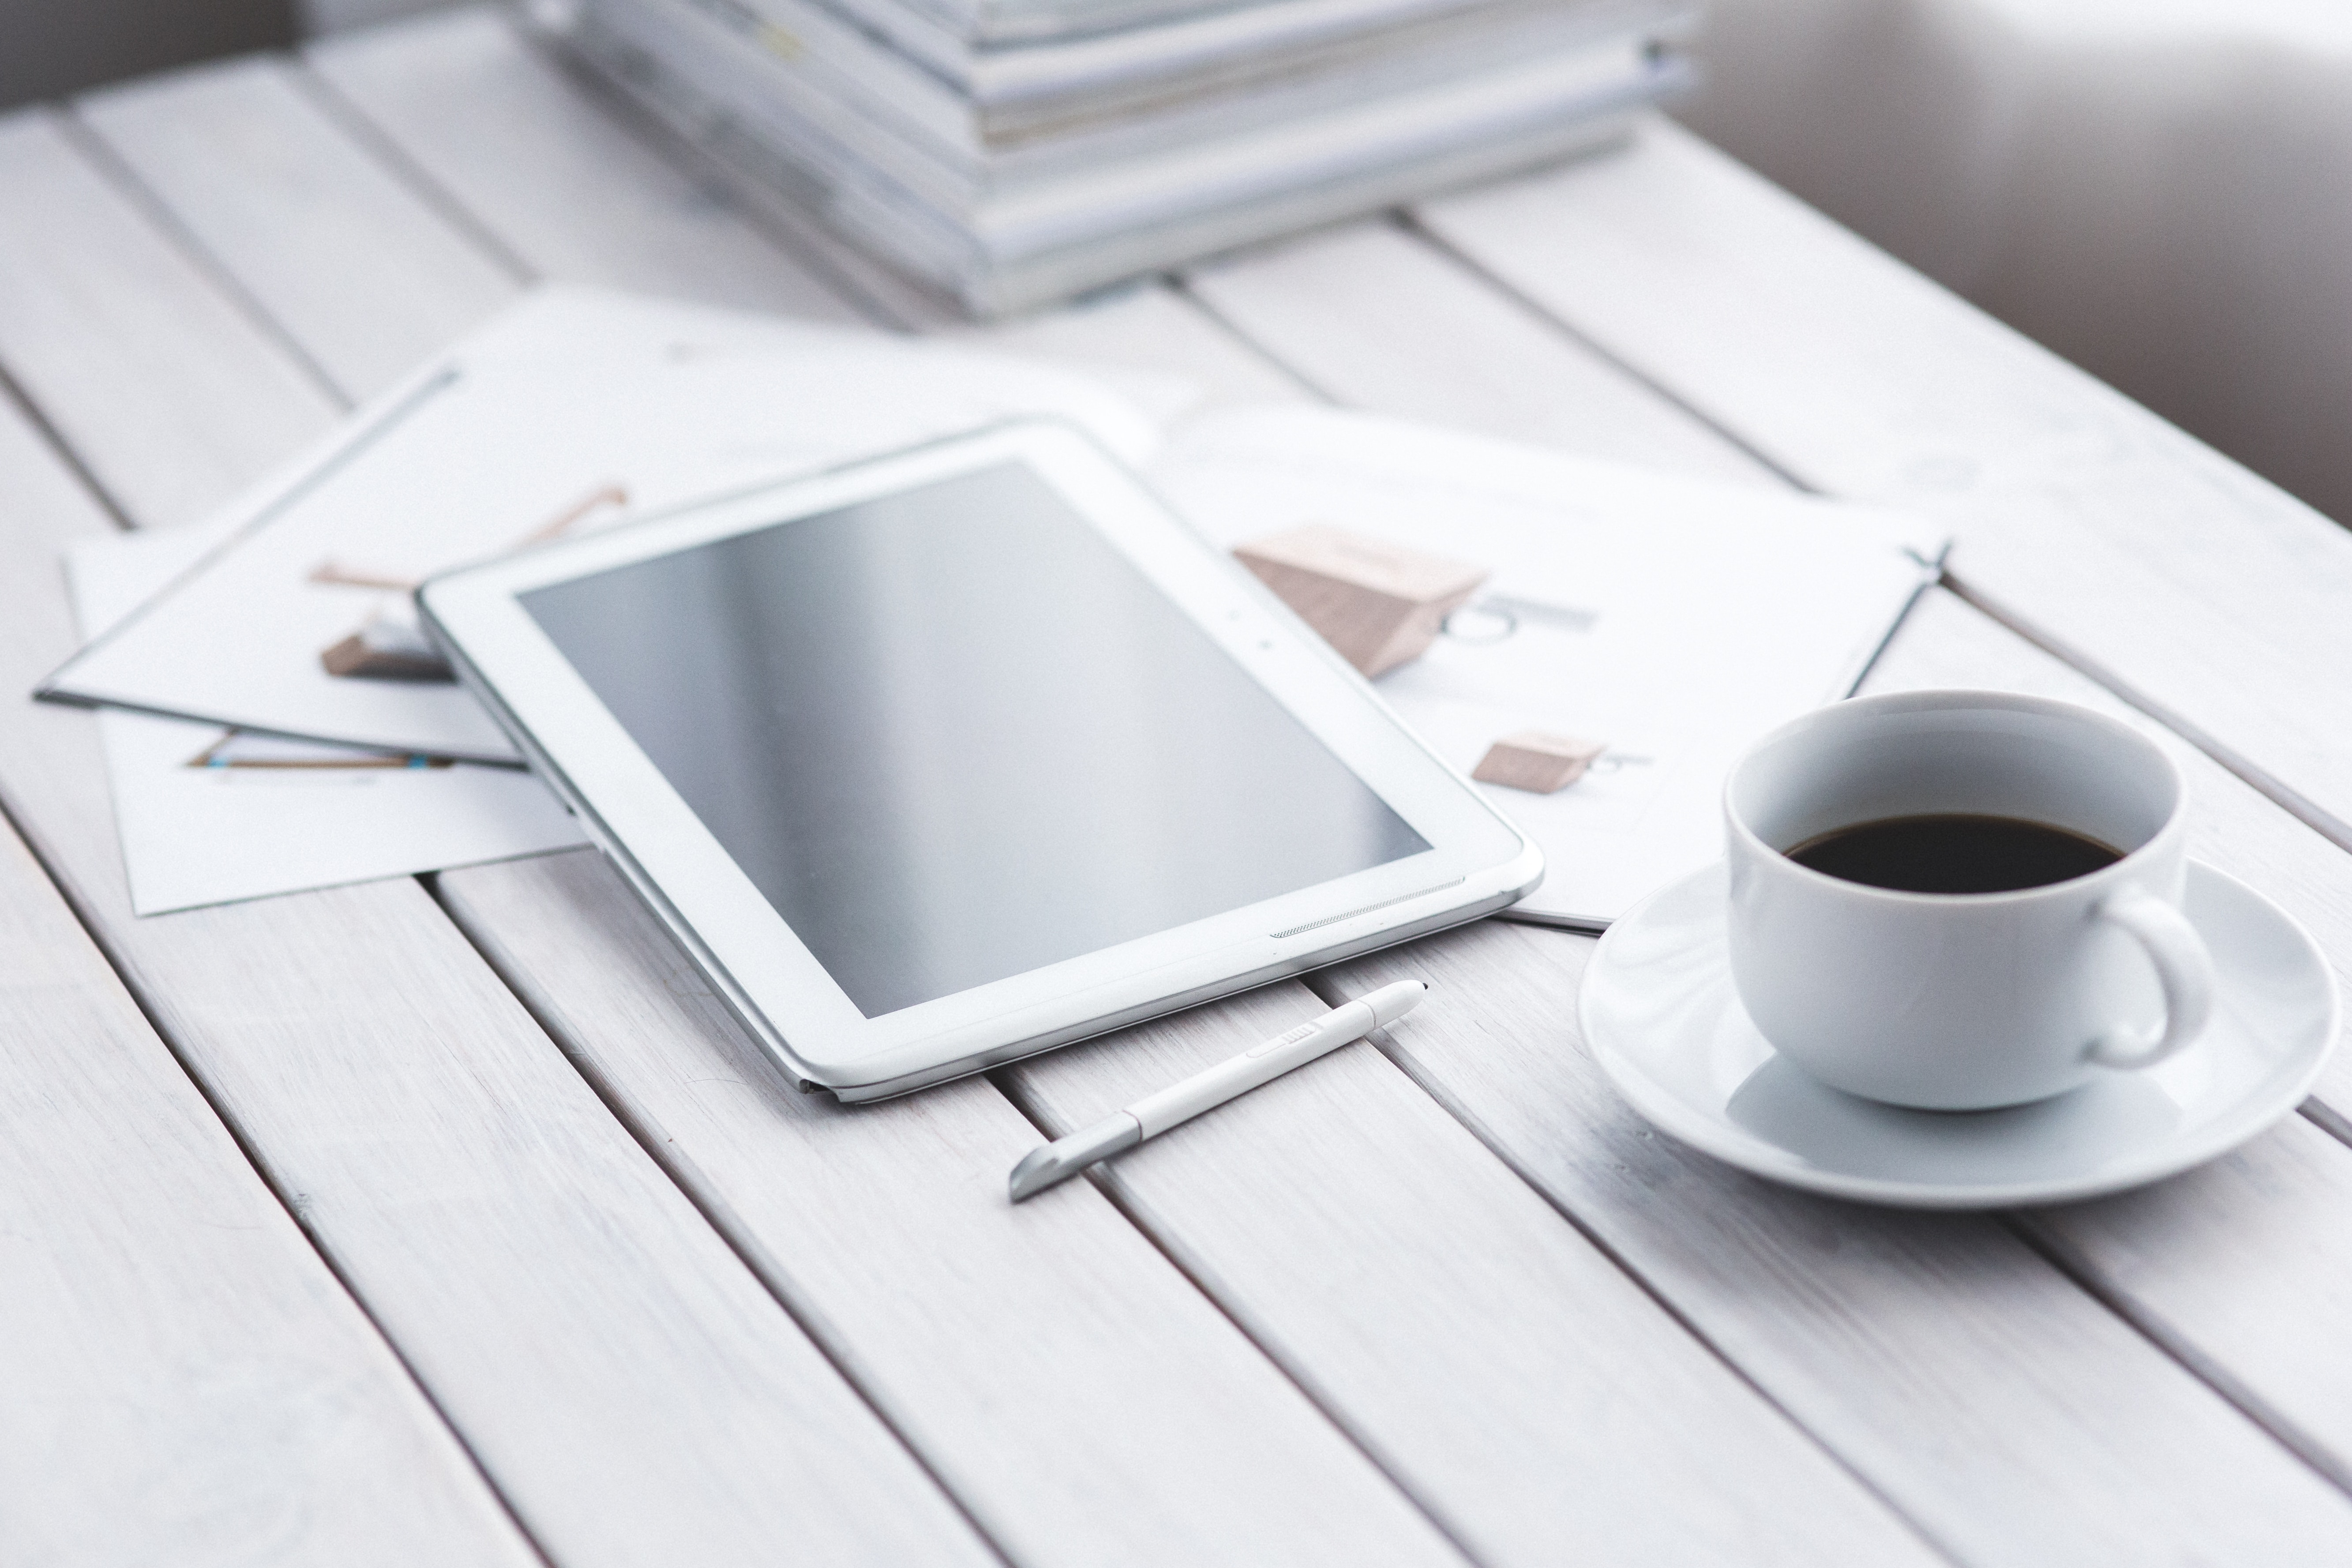 white-tablet-and-cup-of-coffee-6337.jpg (2.23 MB)